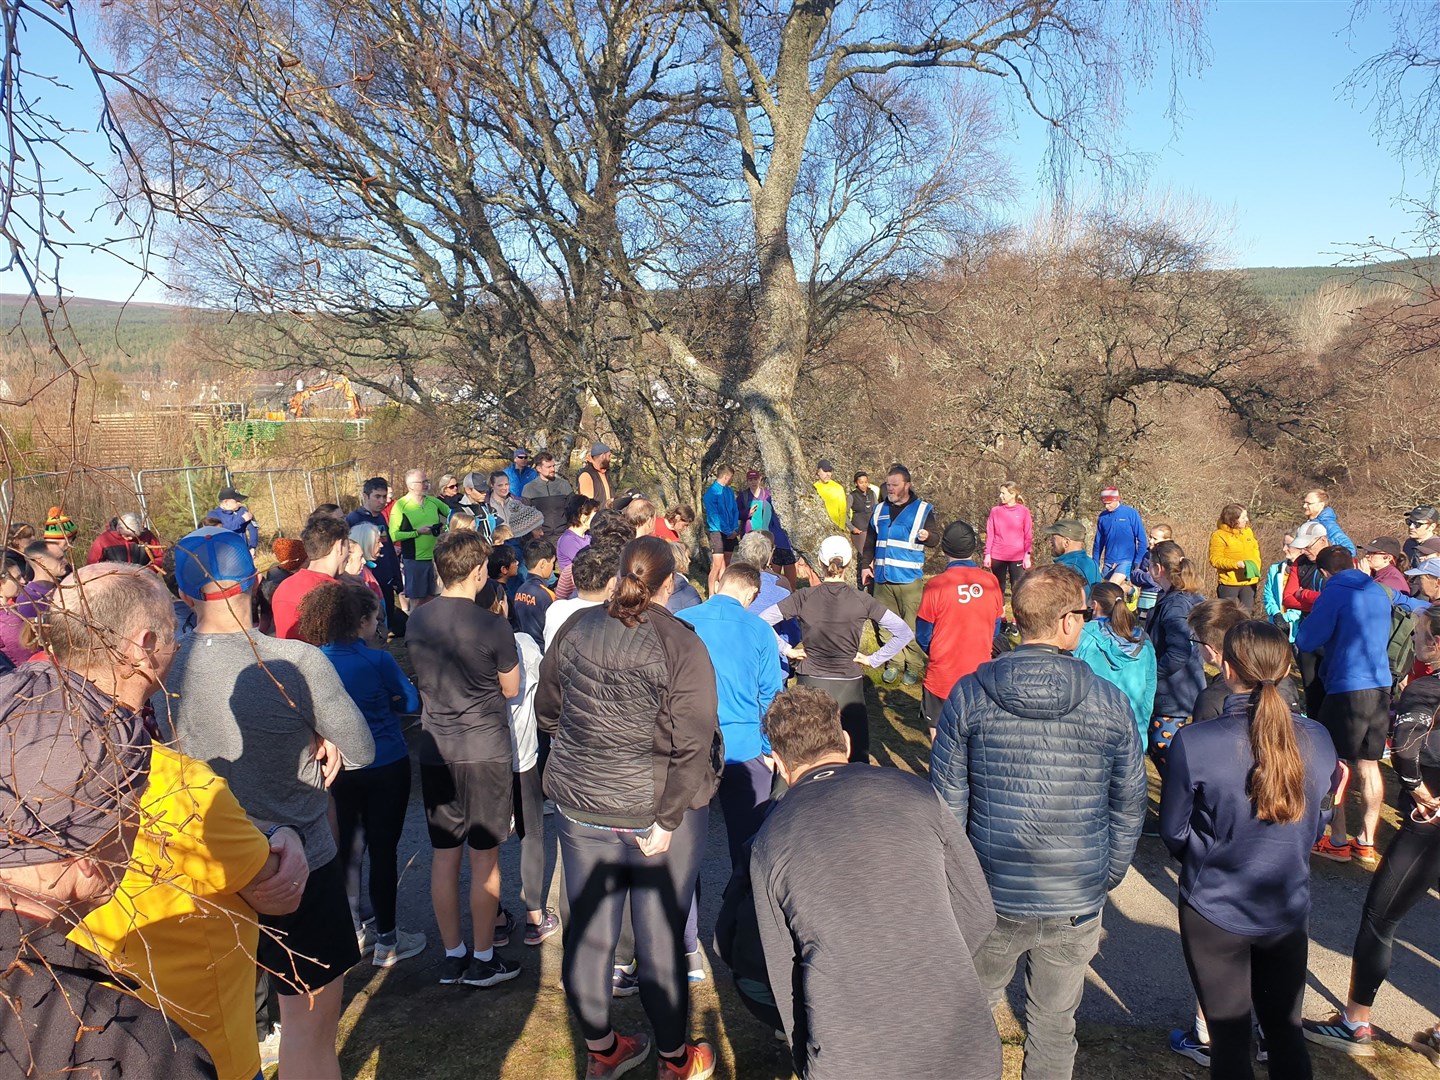 A briefing for this morning's runners